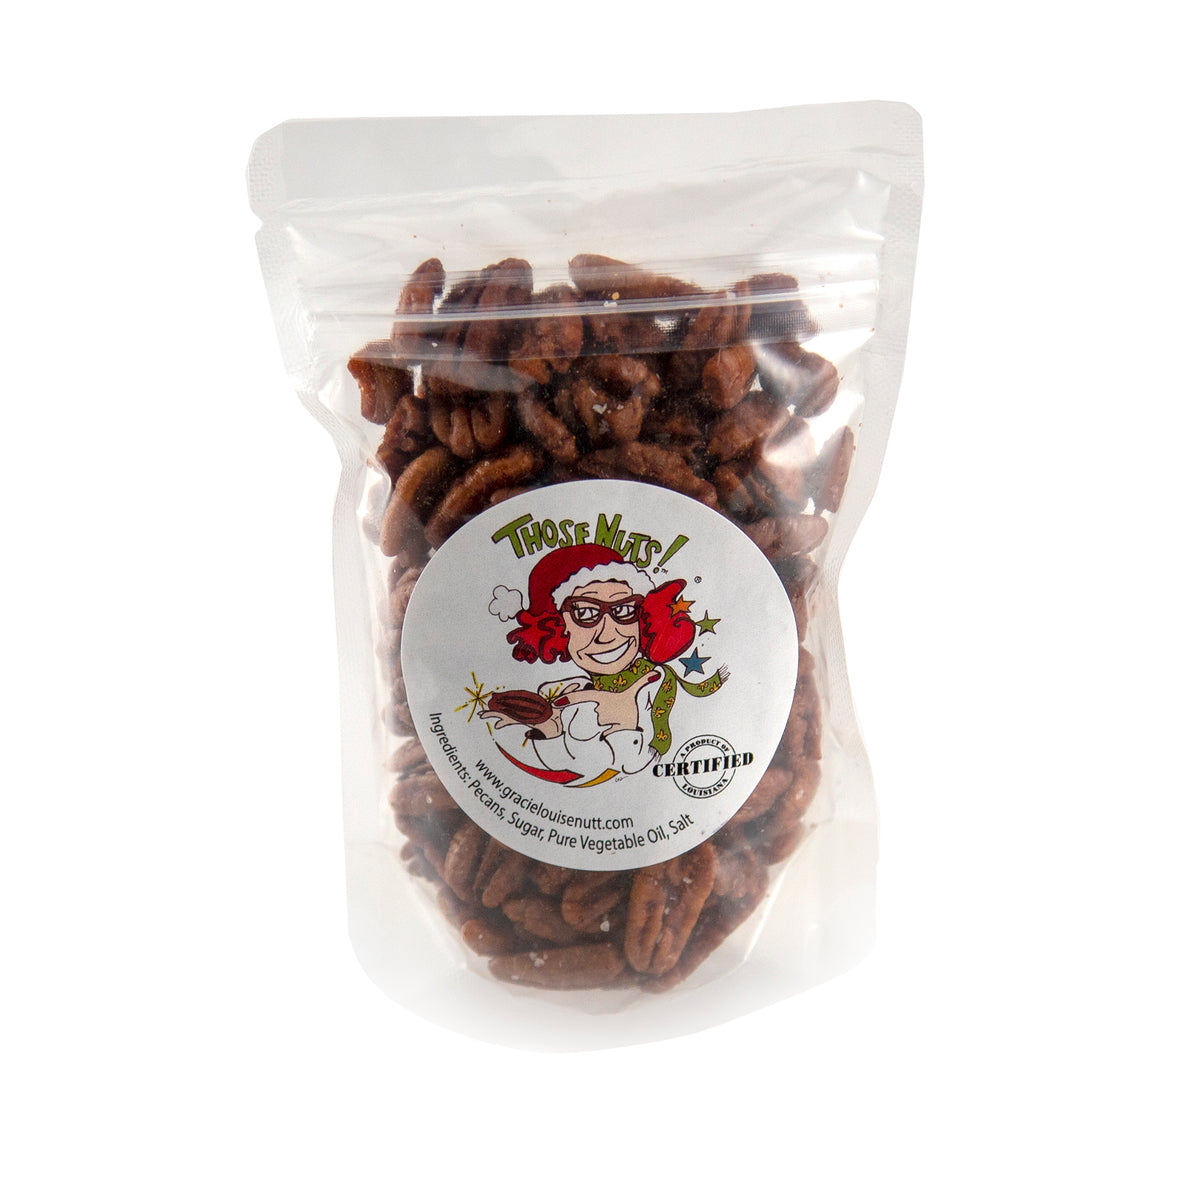 Those Nuts - Premiere_Louisiana Products - Red Stick Spice Company